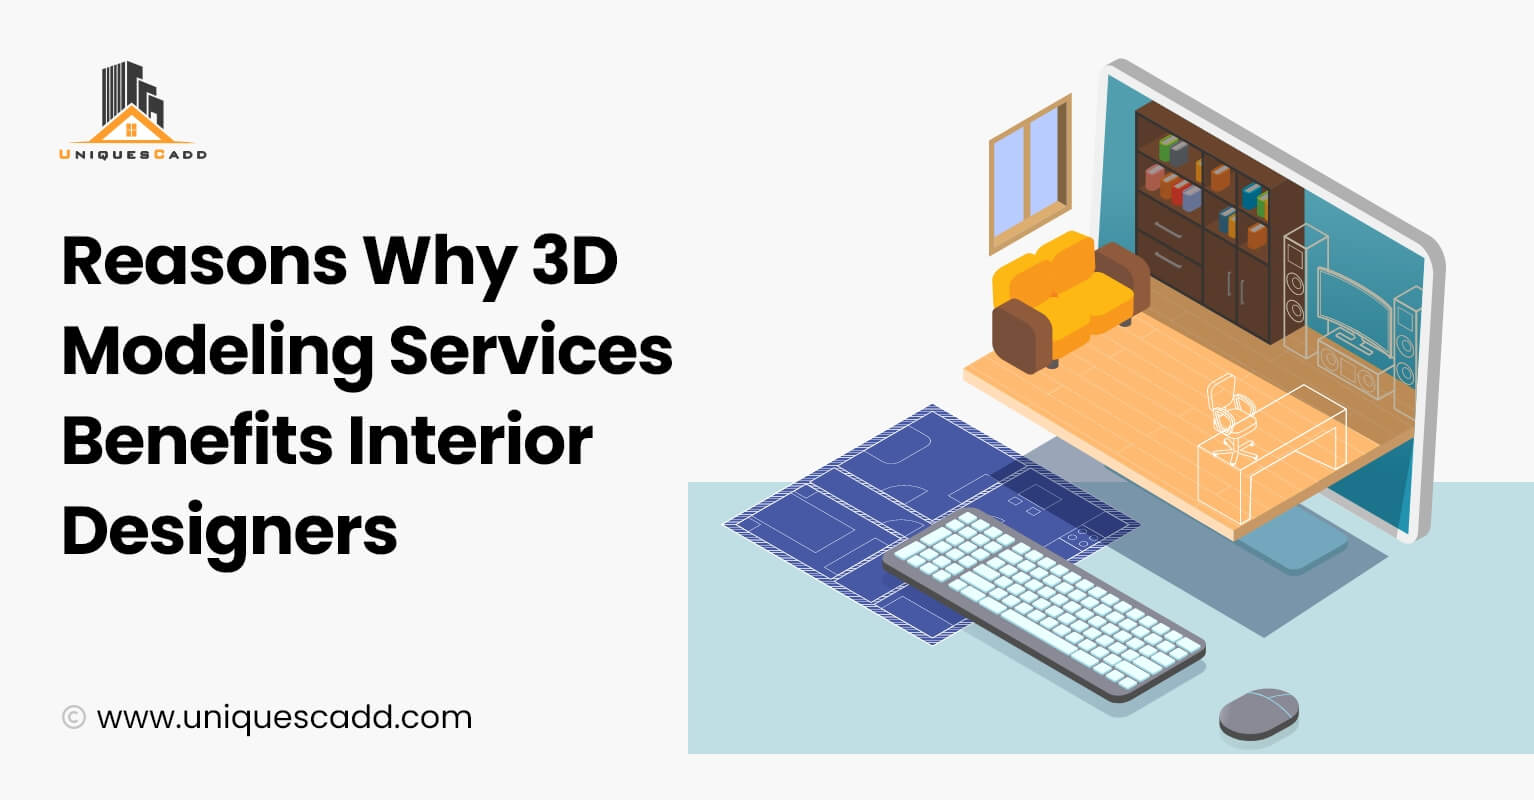 Reasons Why 3D Modeling Services Benefits Interior Designers